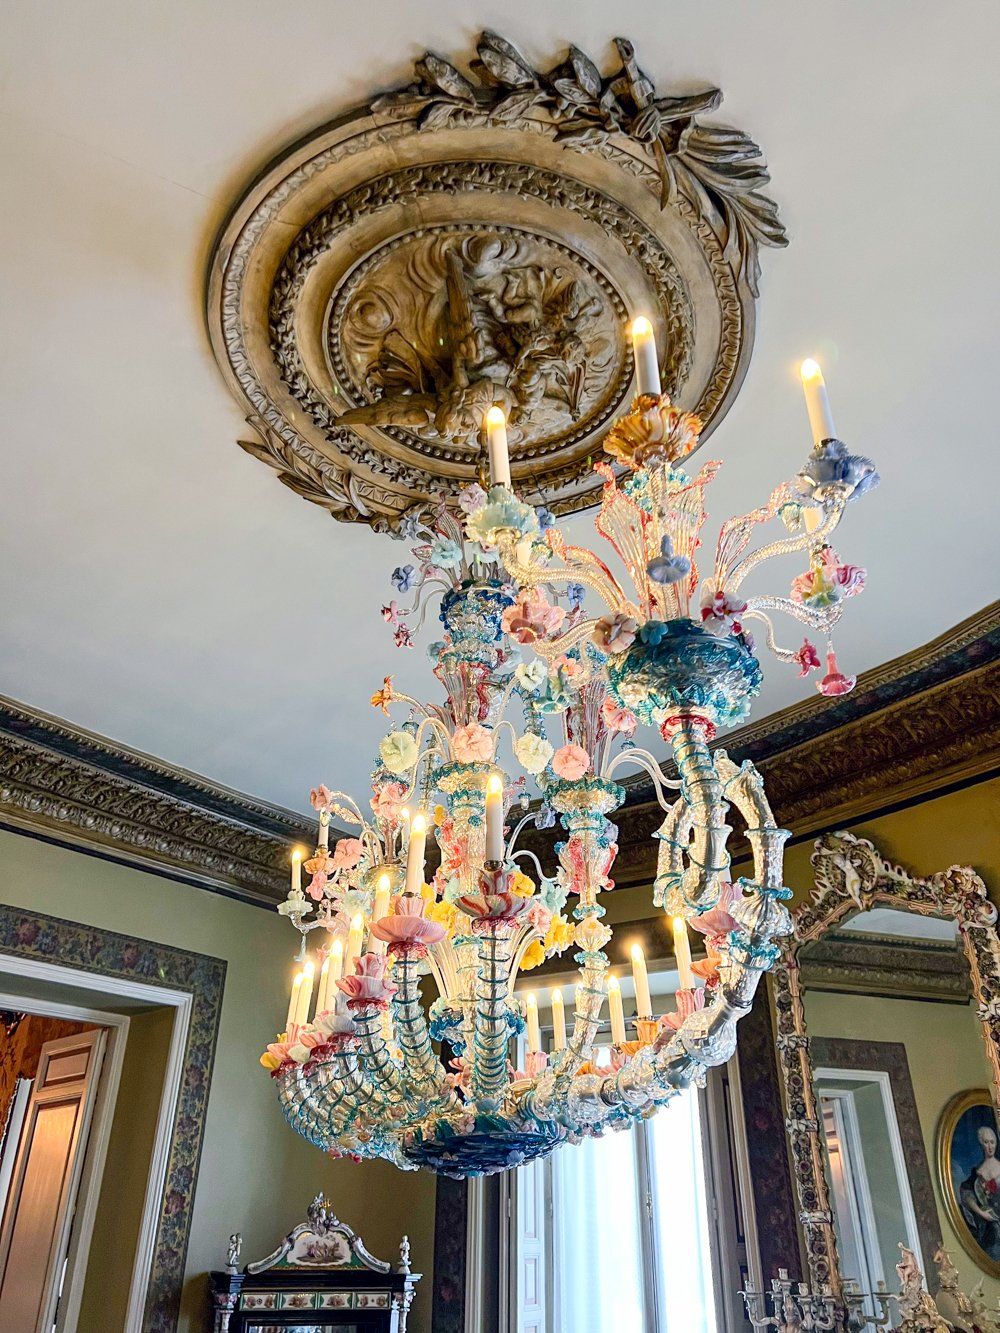 Murano Chandelier at the Museo Cerralbo